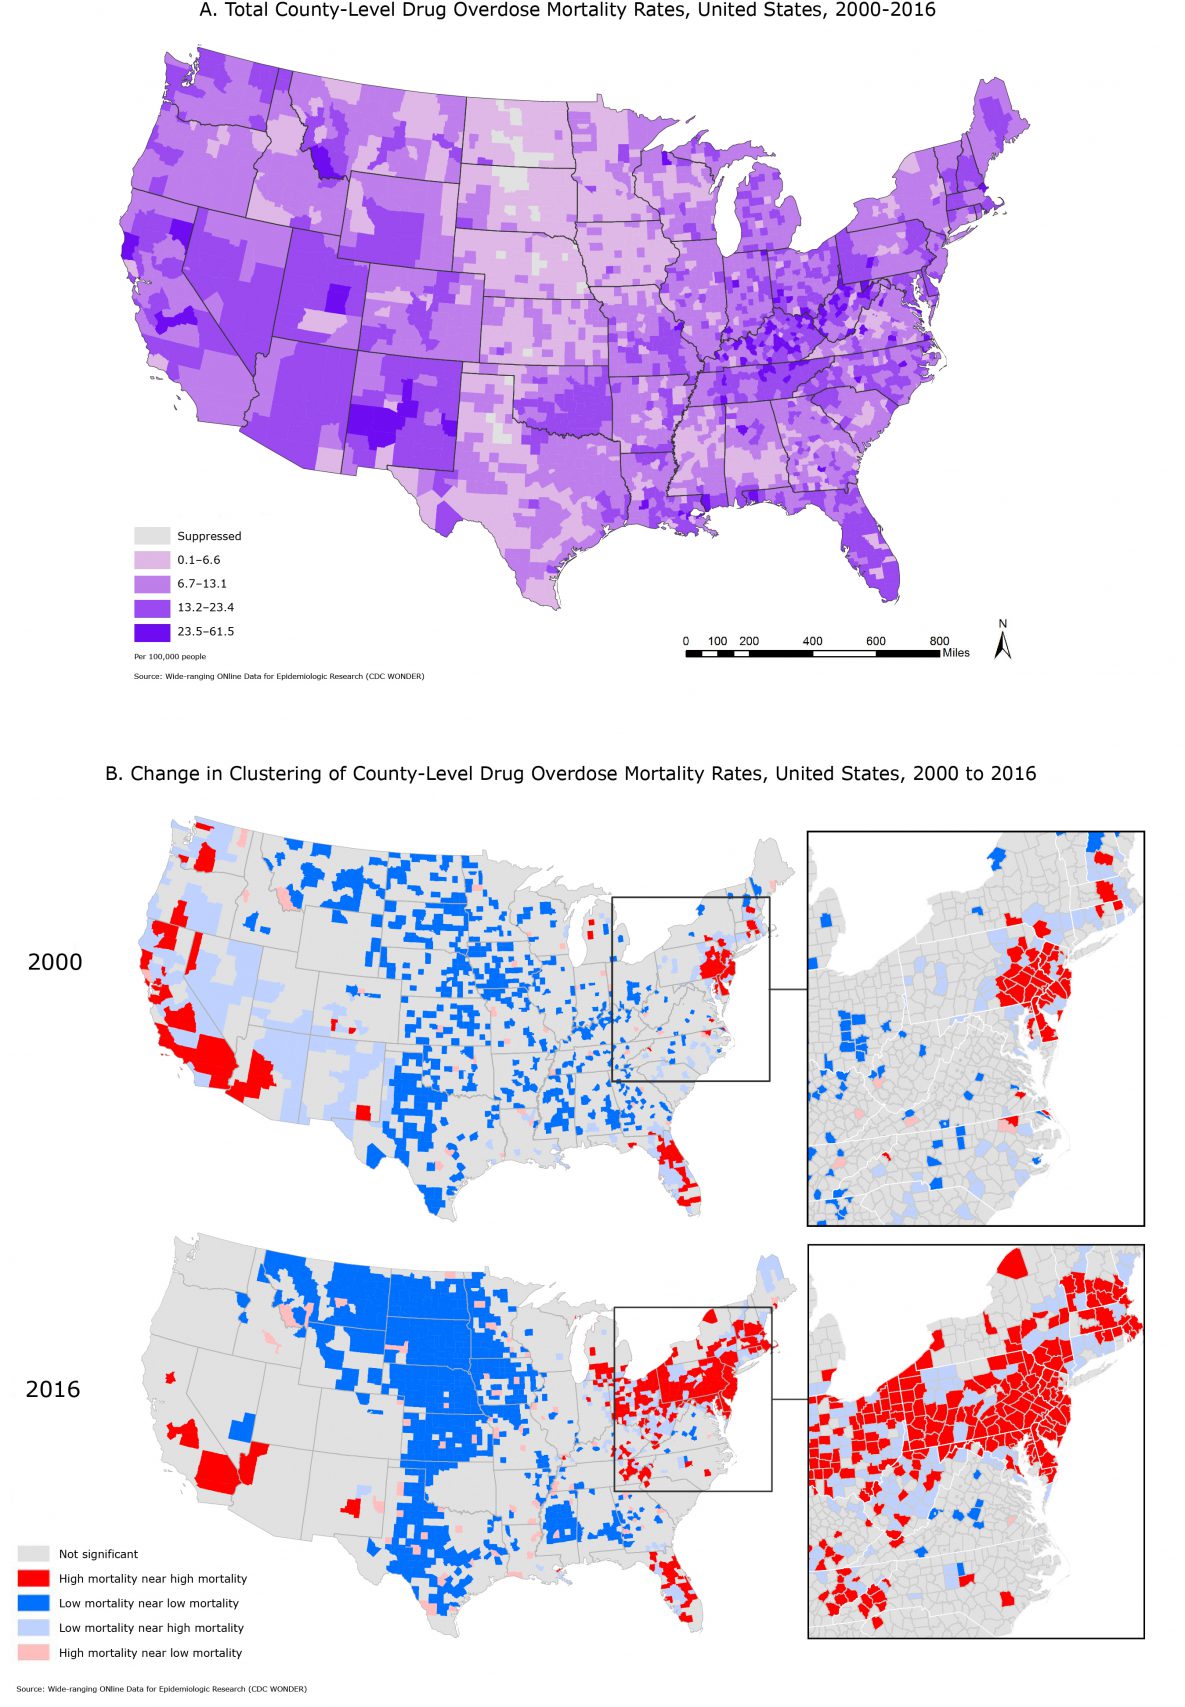 Map A displays all drug overdose mortality in contiguous US counties for 2000–2016. Overall, observed mortality rates were higher in Appalachia and the Southwest. Map B displays clustering in US county-level drug overdose mortality in 2000 adjacent to drug overdose mortality in 2016 to visually compare the geographic change in drug overdose mortality. The magnified images suggest that counties with low mortality rates that are adjacent to those with high mortality rates may be at risk for increased deaths from drug overdose. The results highlight areas that are identified as significant clusters of drug related overdose mortality.